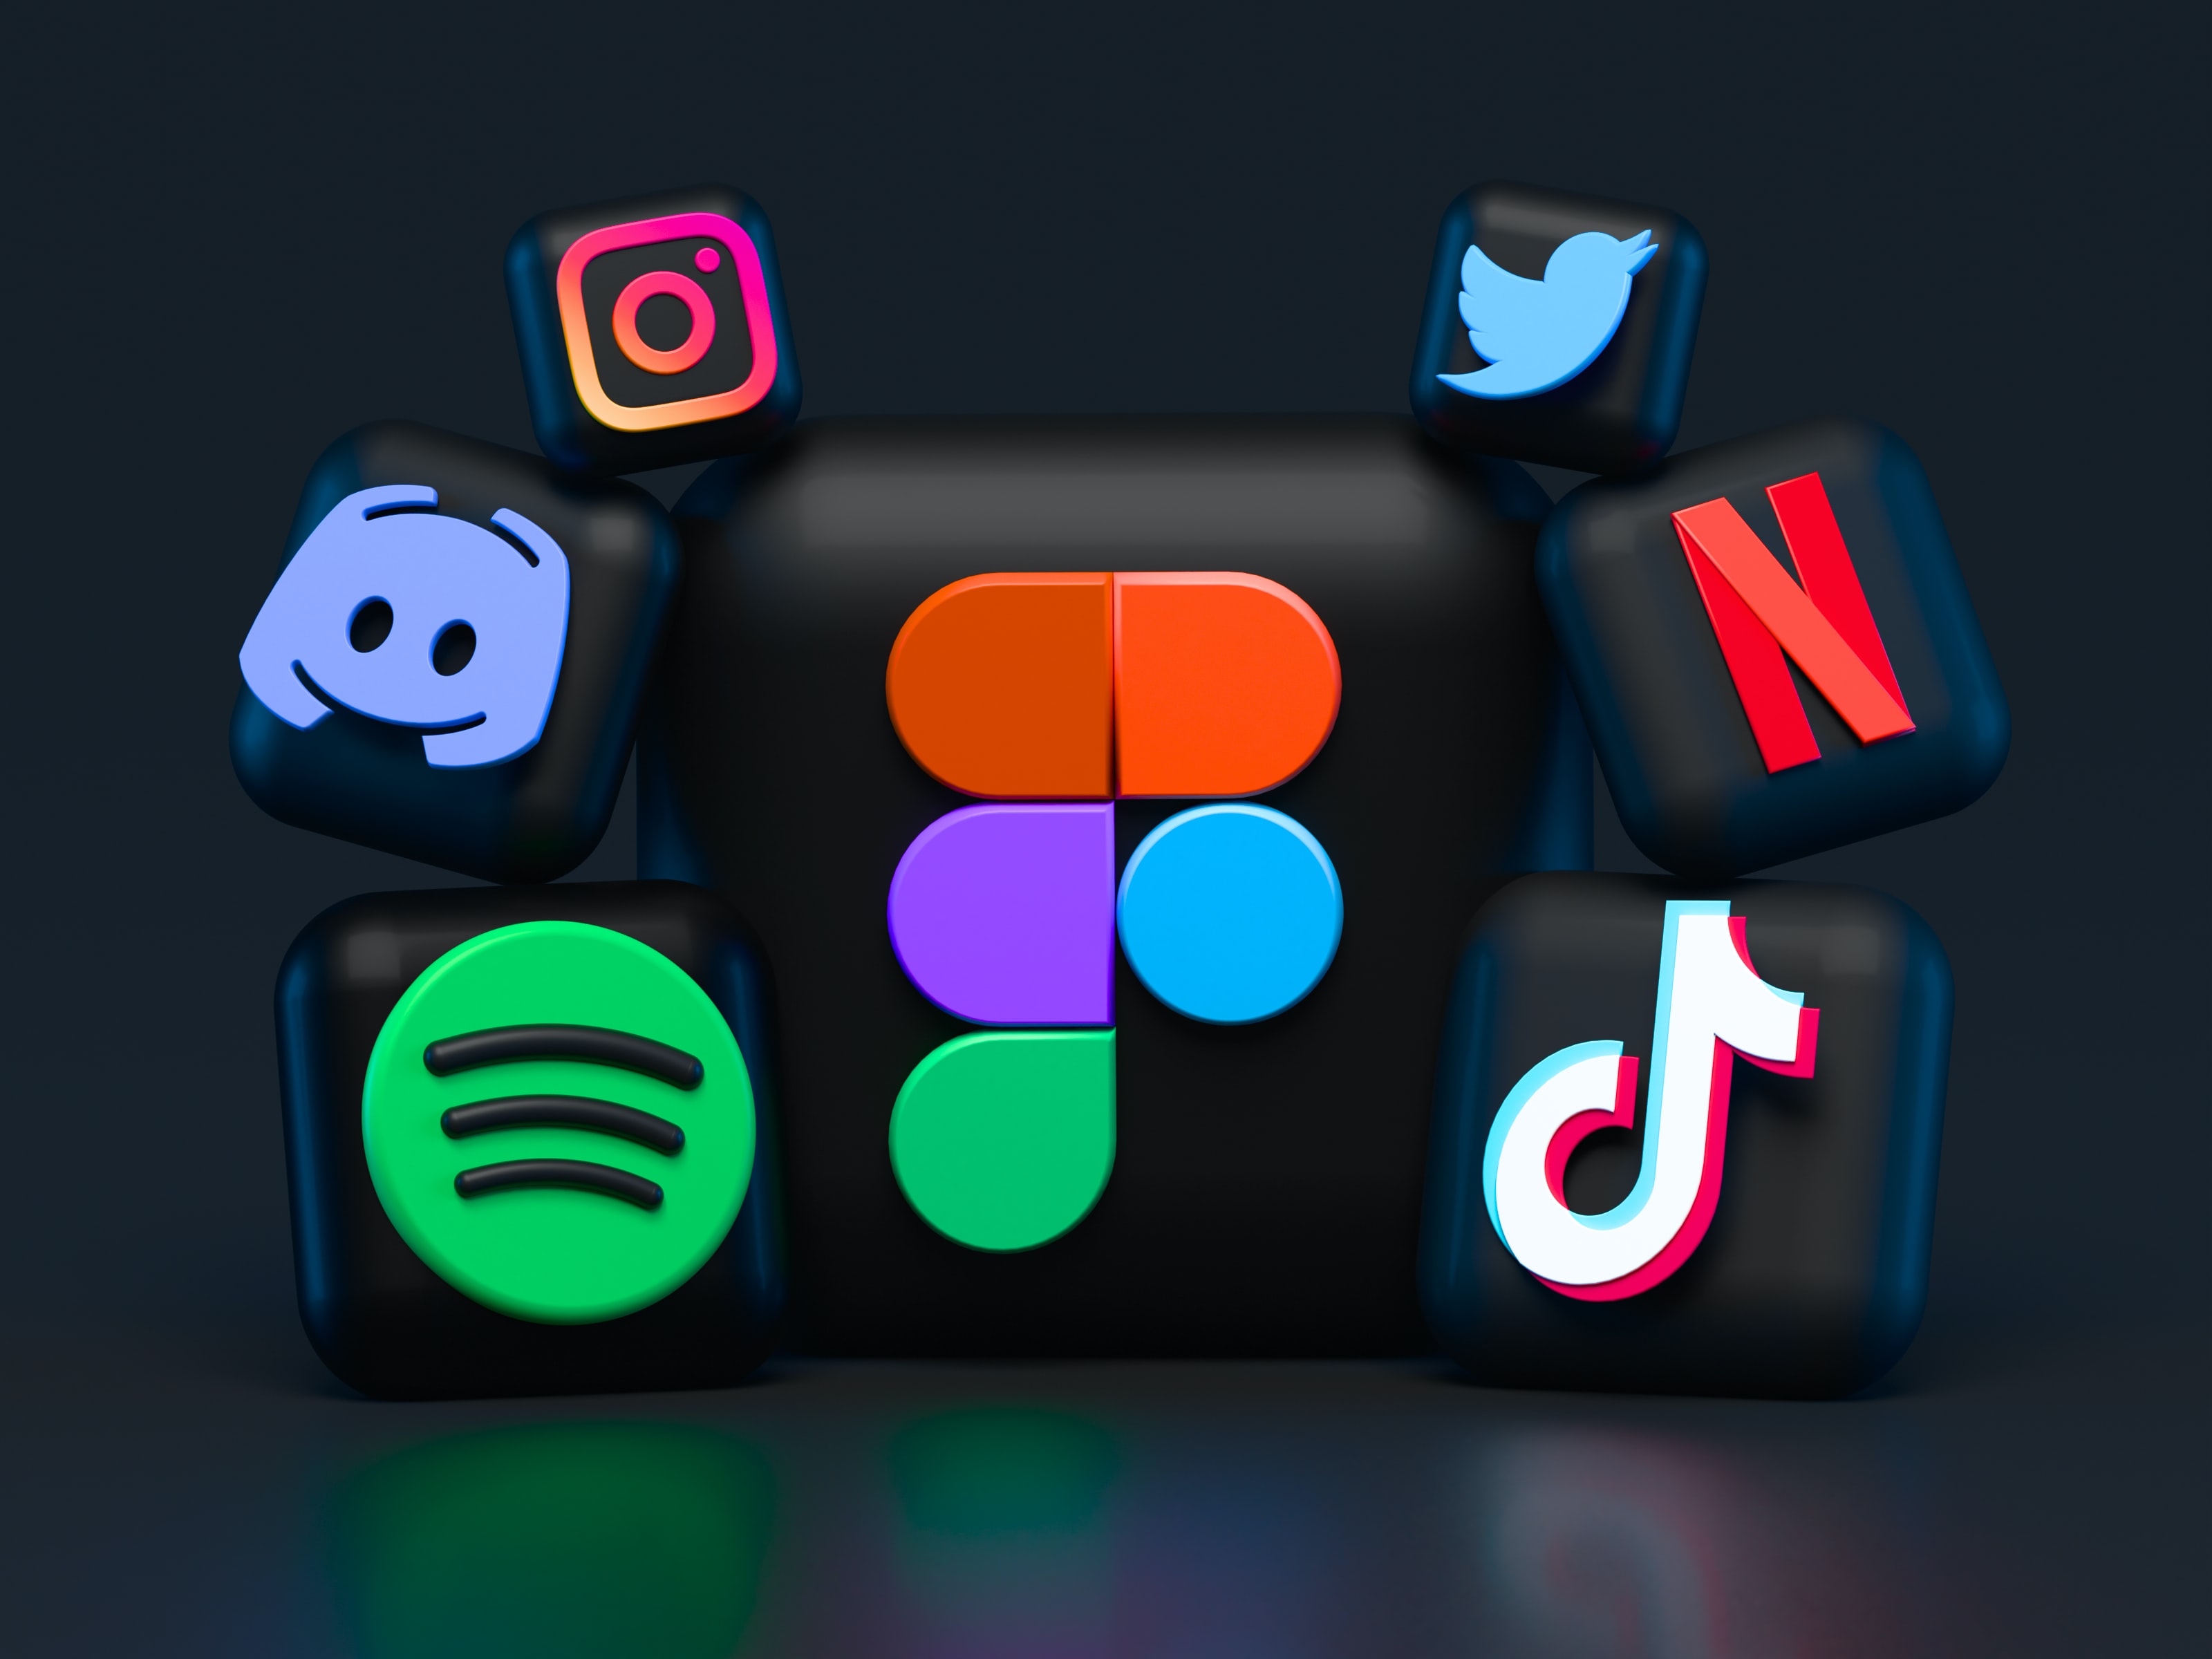 a graphic showing a variety of app logos as 3d tiles